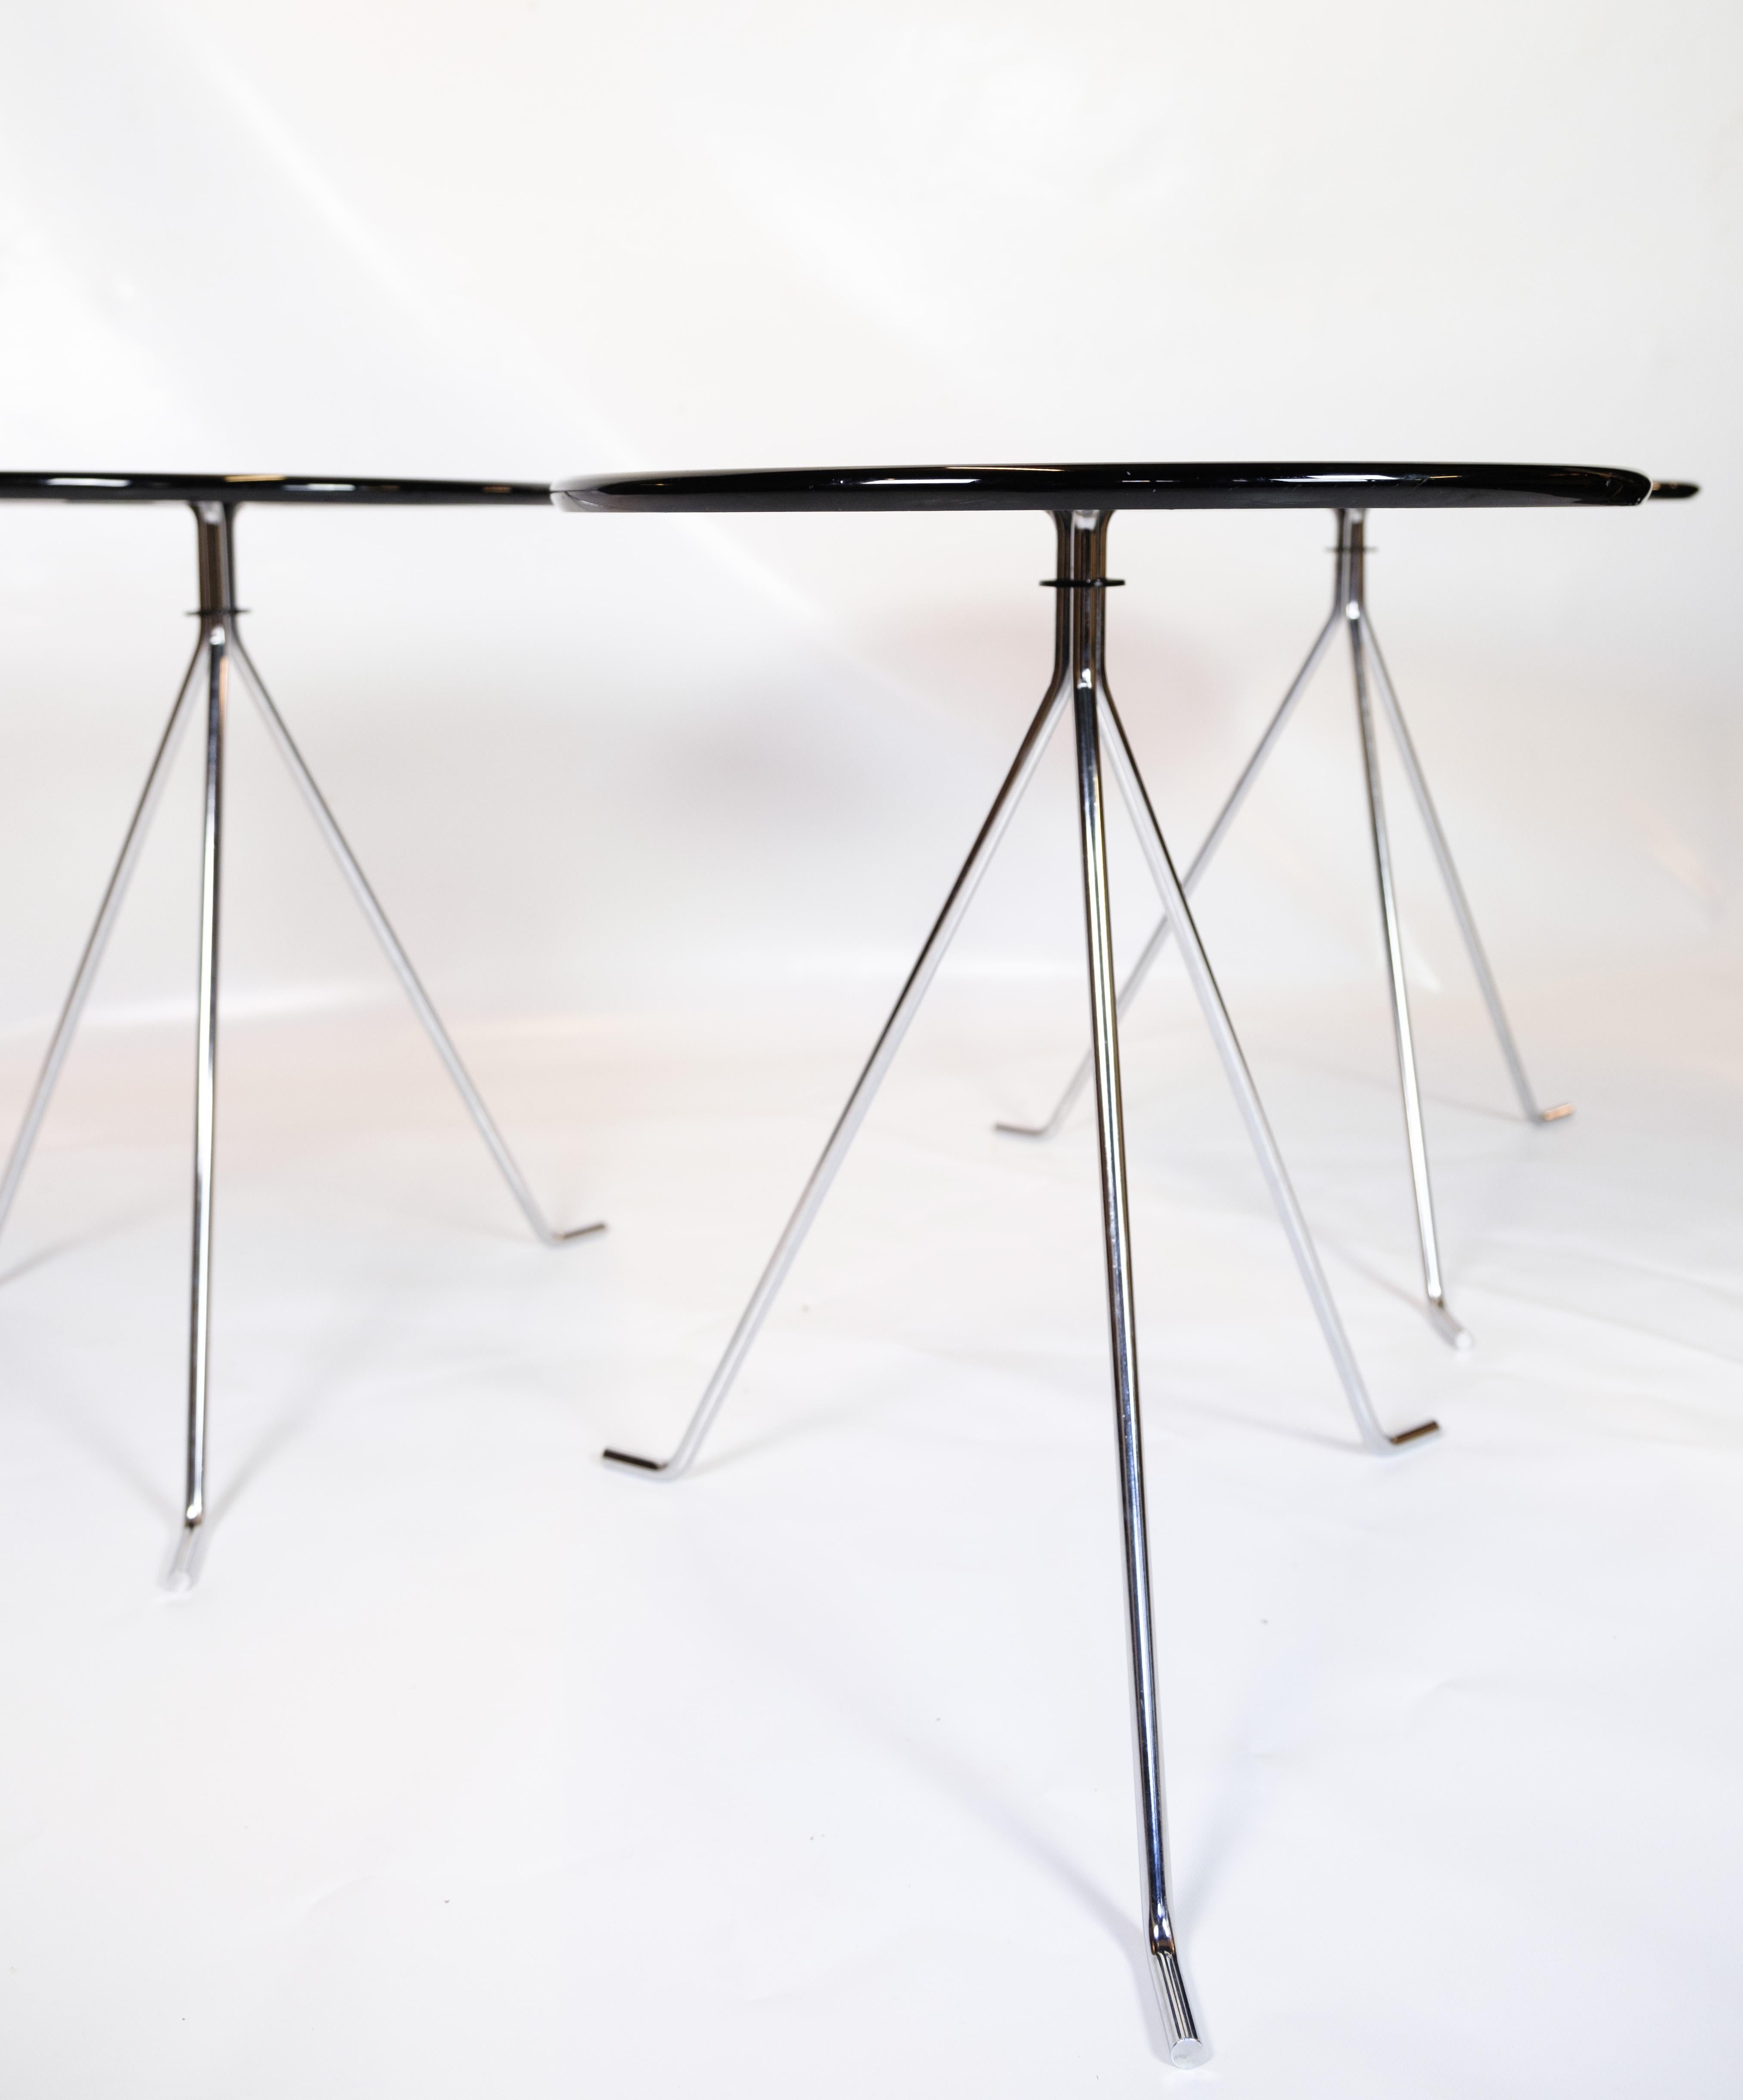 Coffee table set consisting of 3 small round tables with chrome legs  For Sale 4